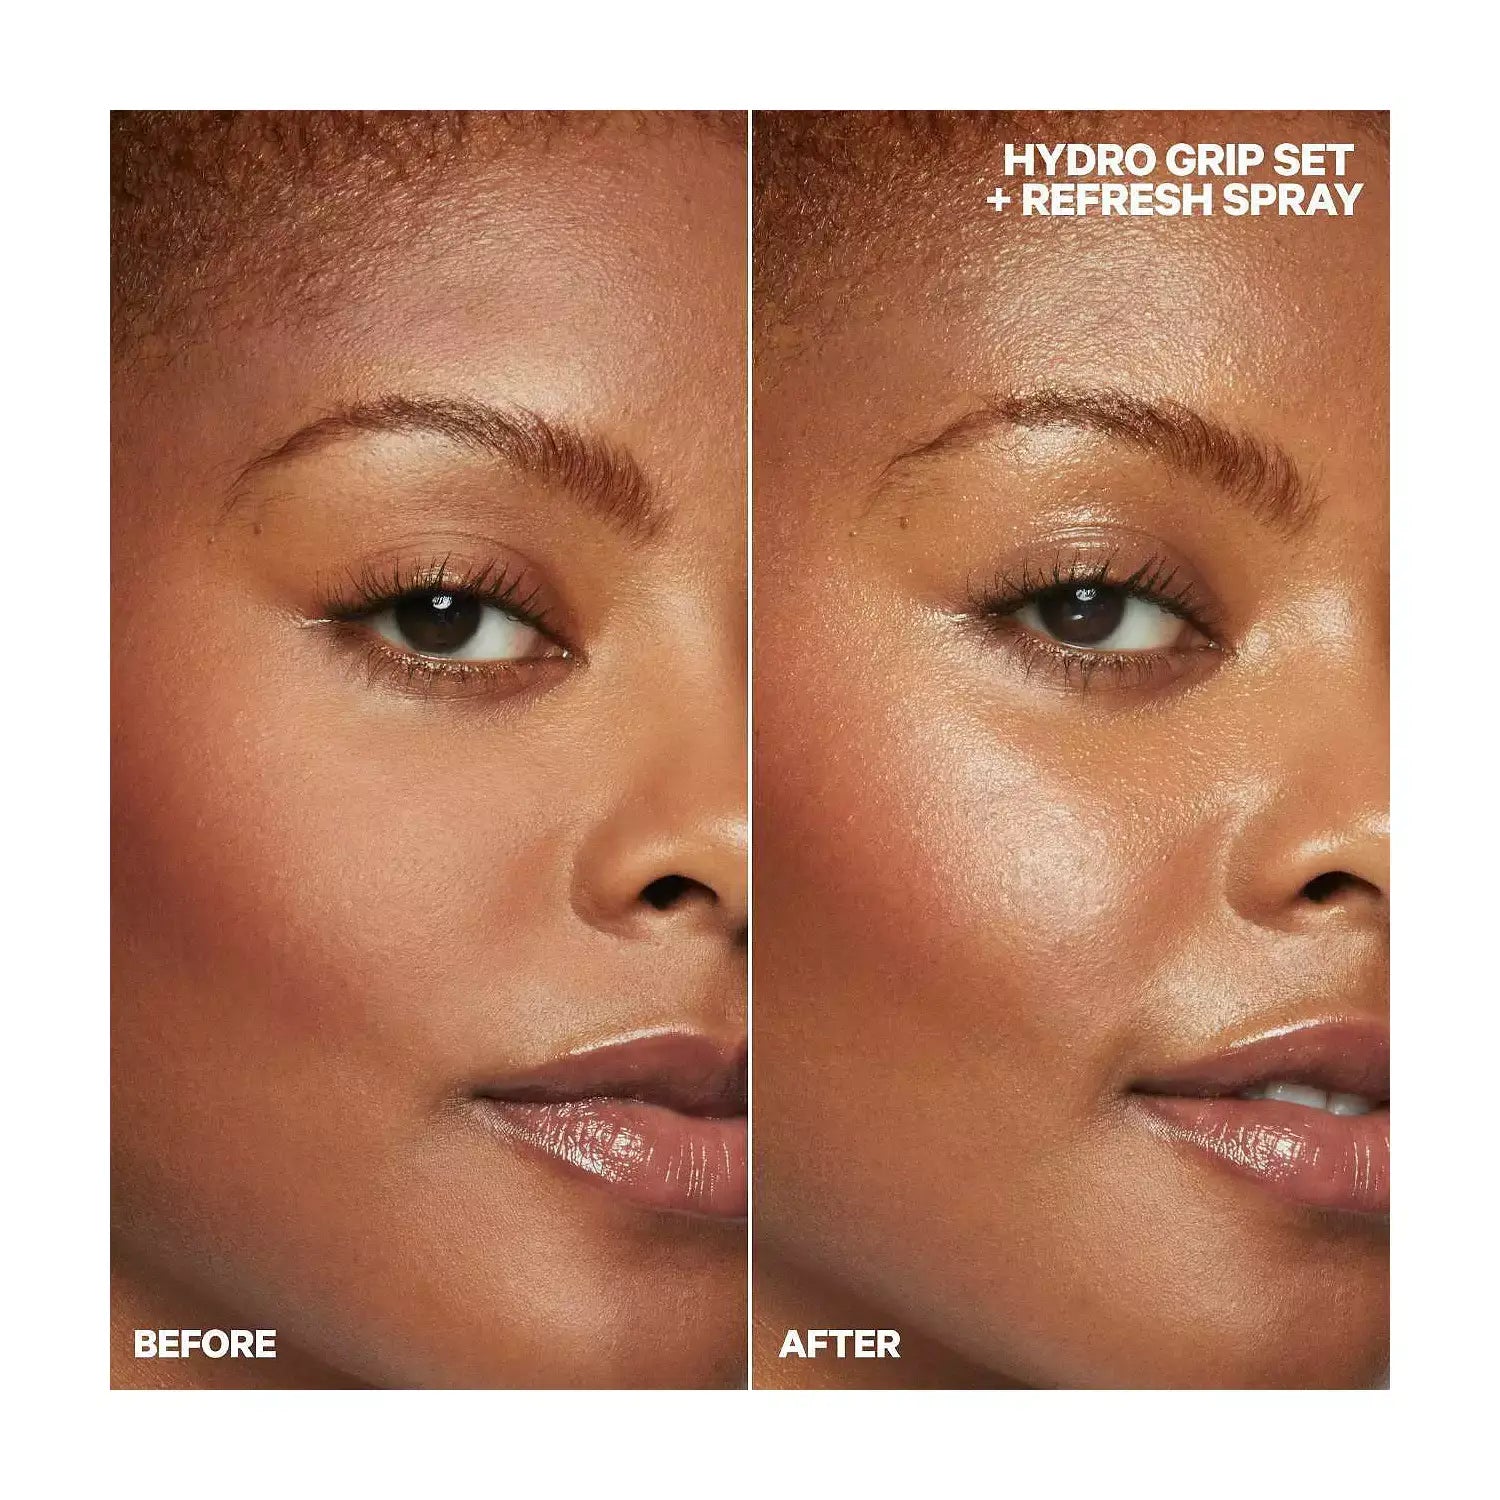 image showing before and after of using milk makeup grip primer and setting spray set available at heygirl.pk for delivery in Pakistan